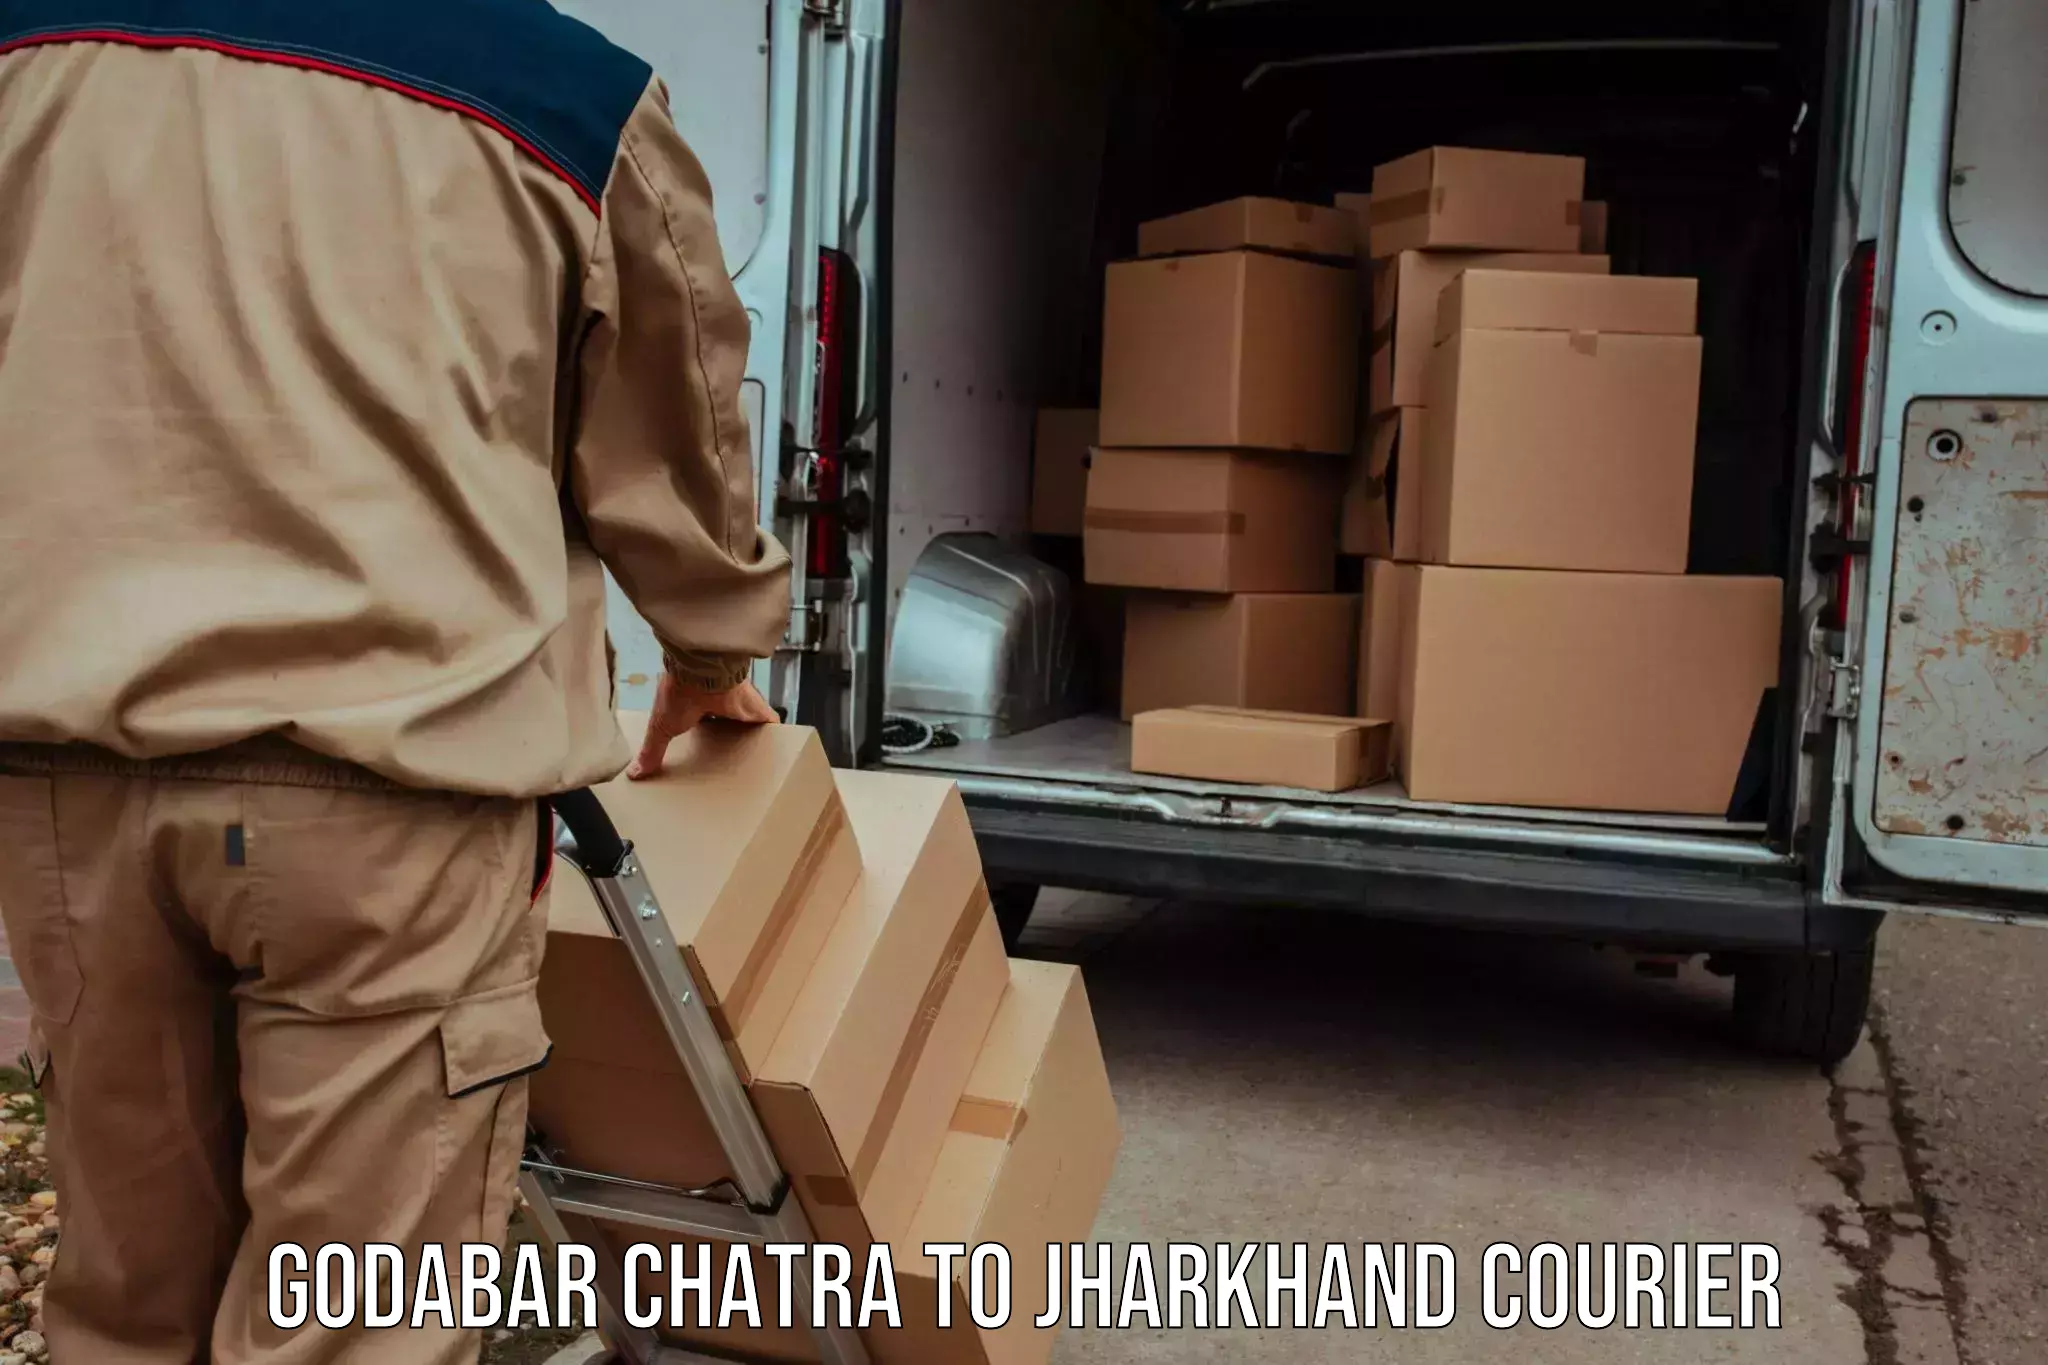 Professional parcel services Godabar Chatra to Chaibasa